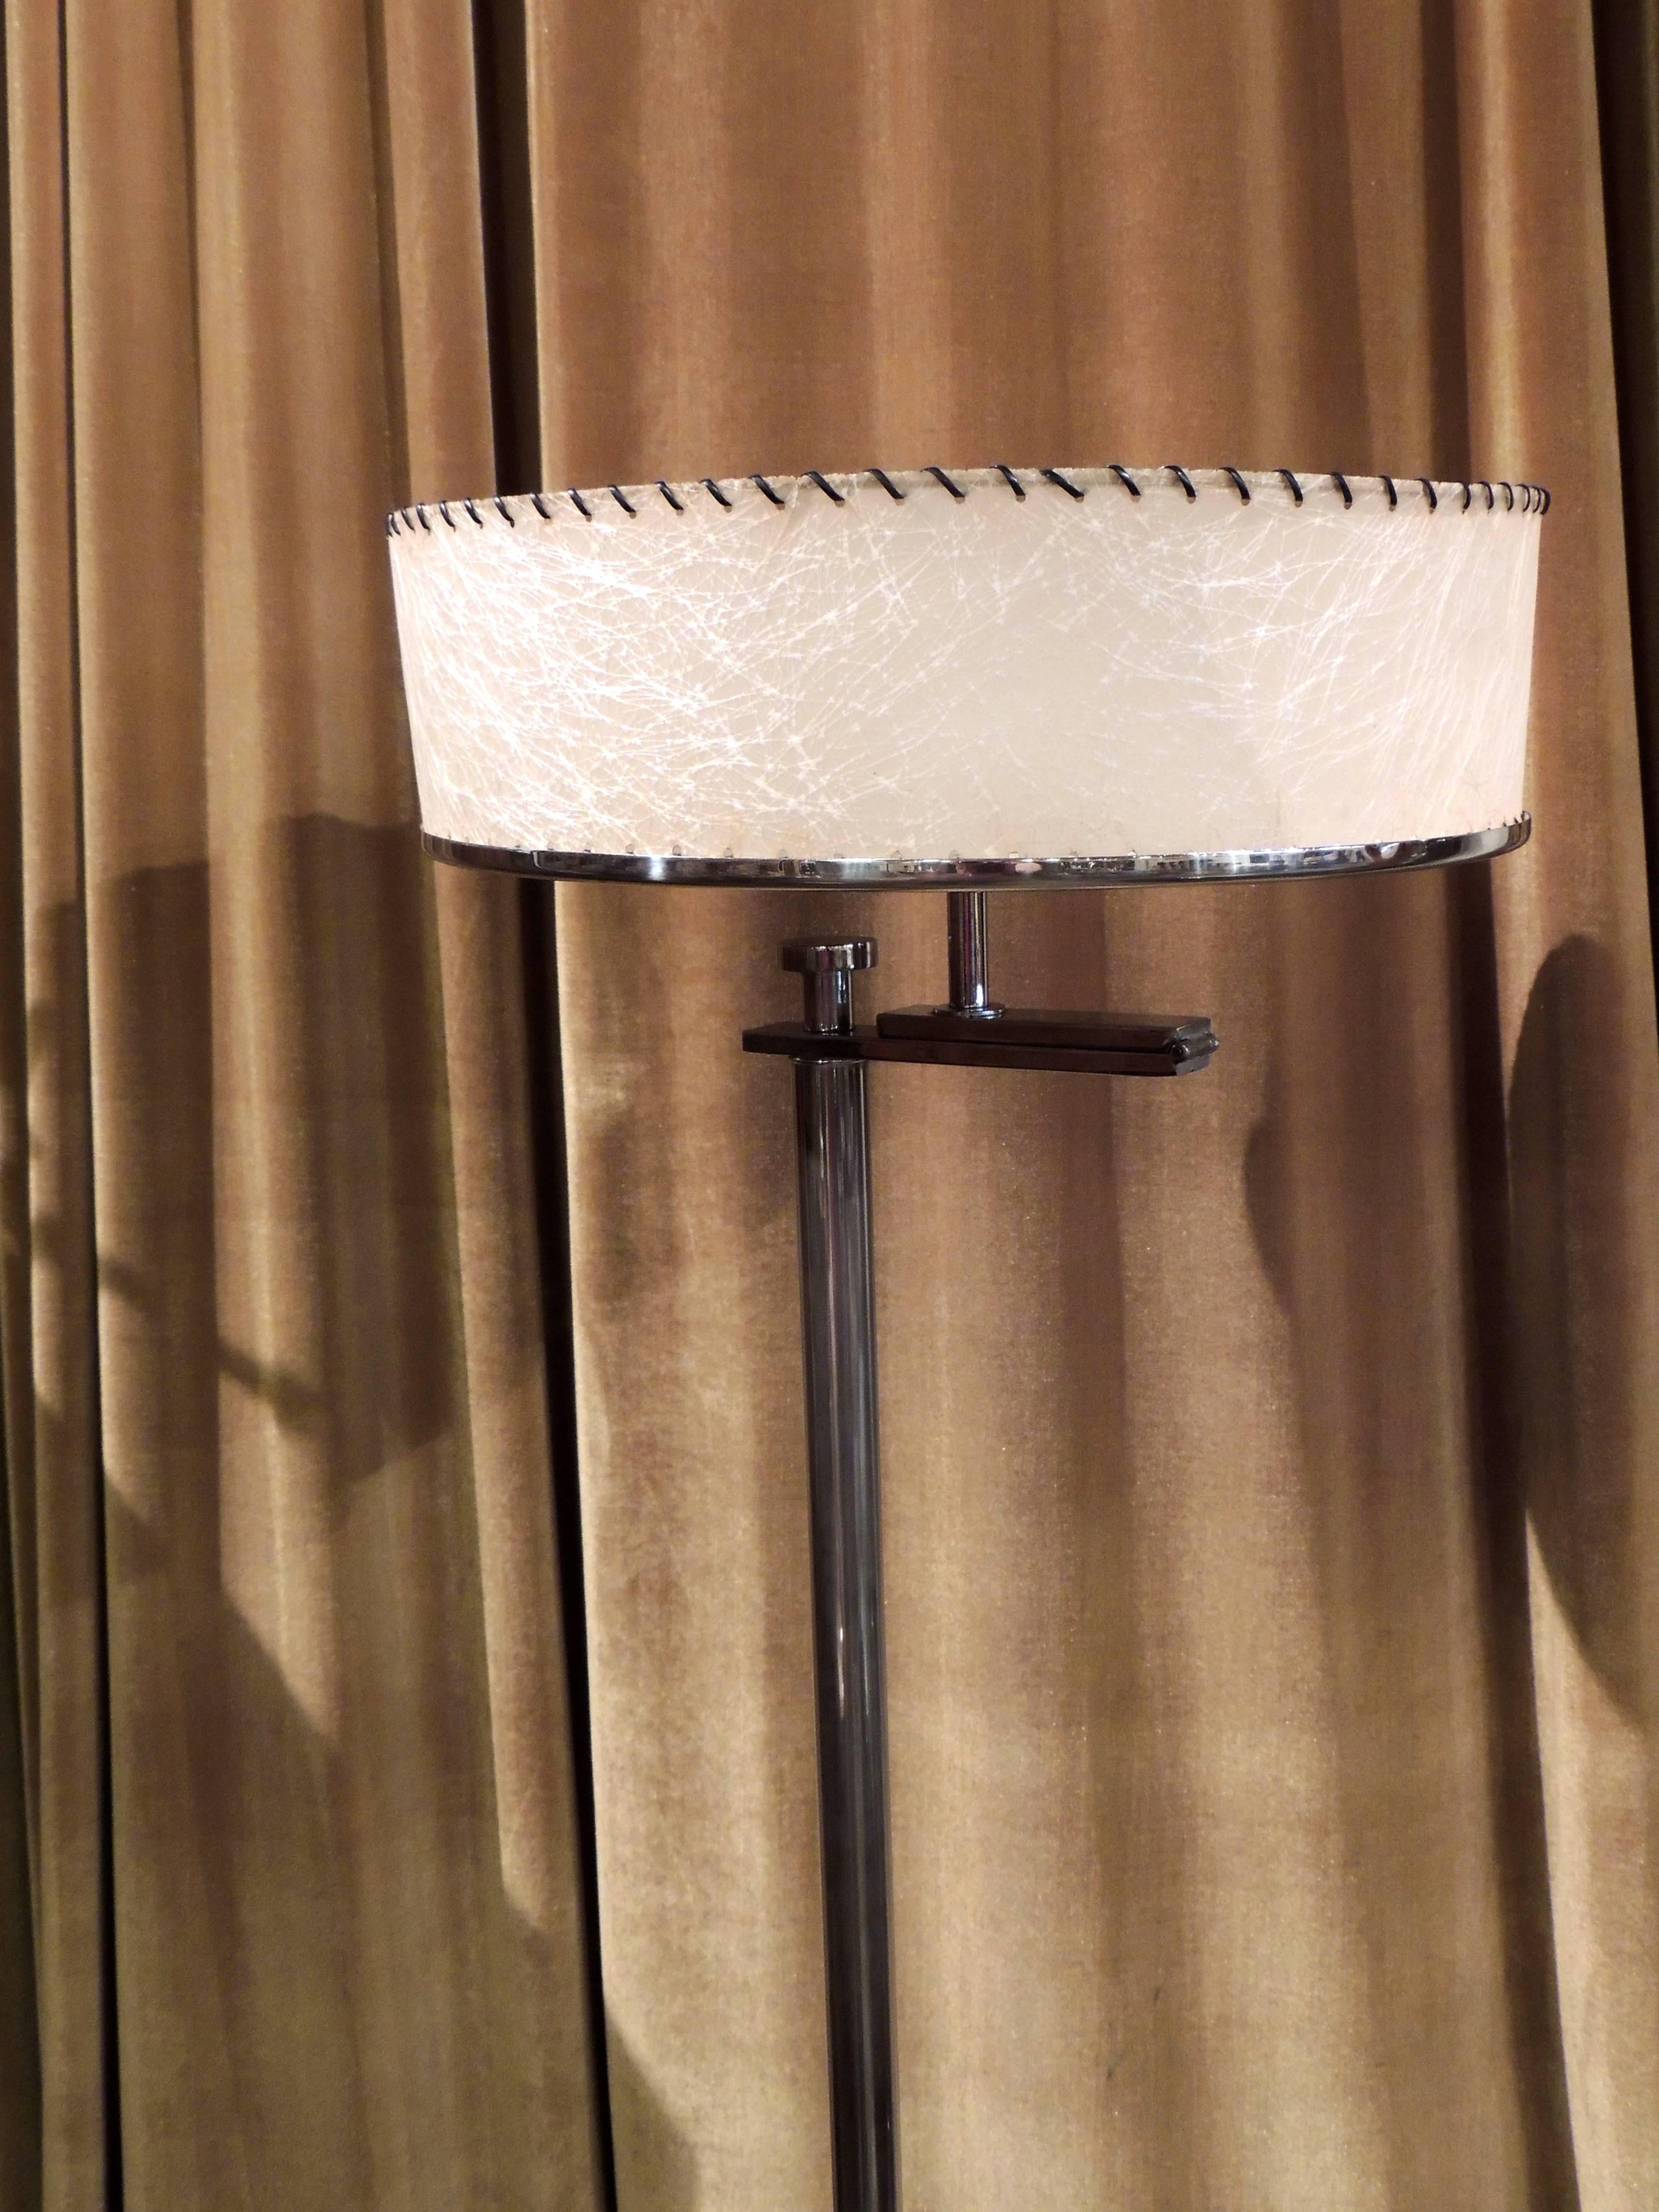 This flip-top convertible floor lamp by Kurt Versen was created in the “Deco Era” but it certainly has all the elements of a midcentury point of view and would be equally “at home” in either environment.

The chrome-plated brass Stand has a hinged